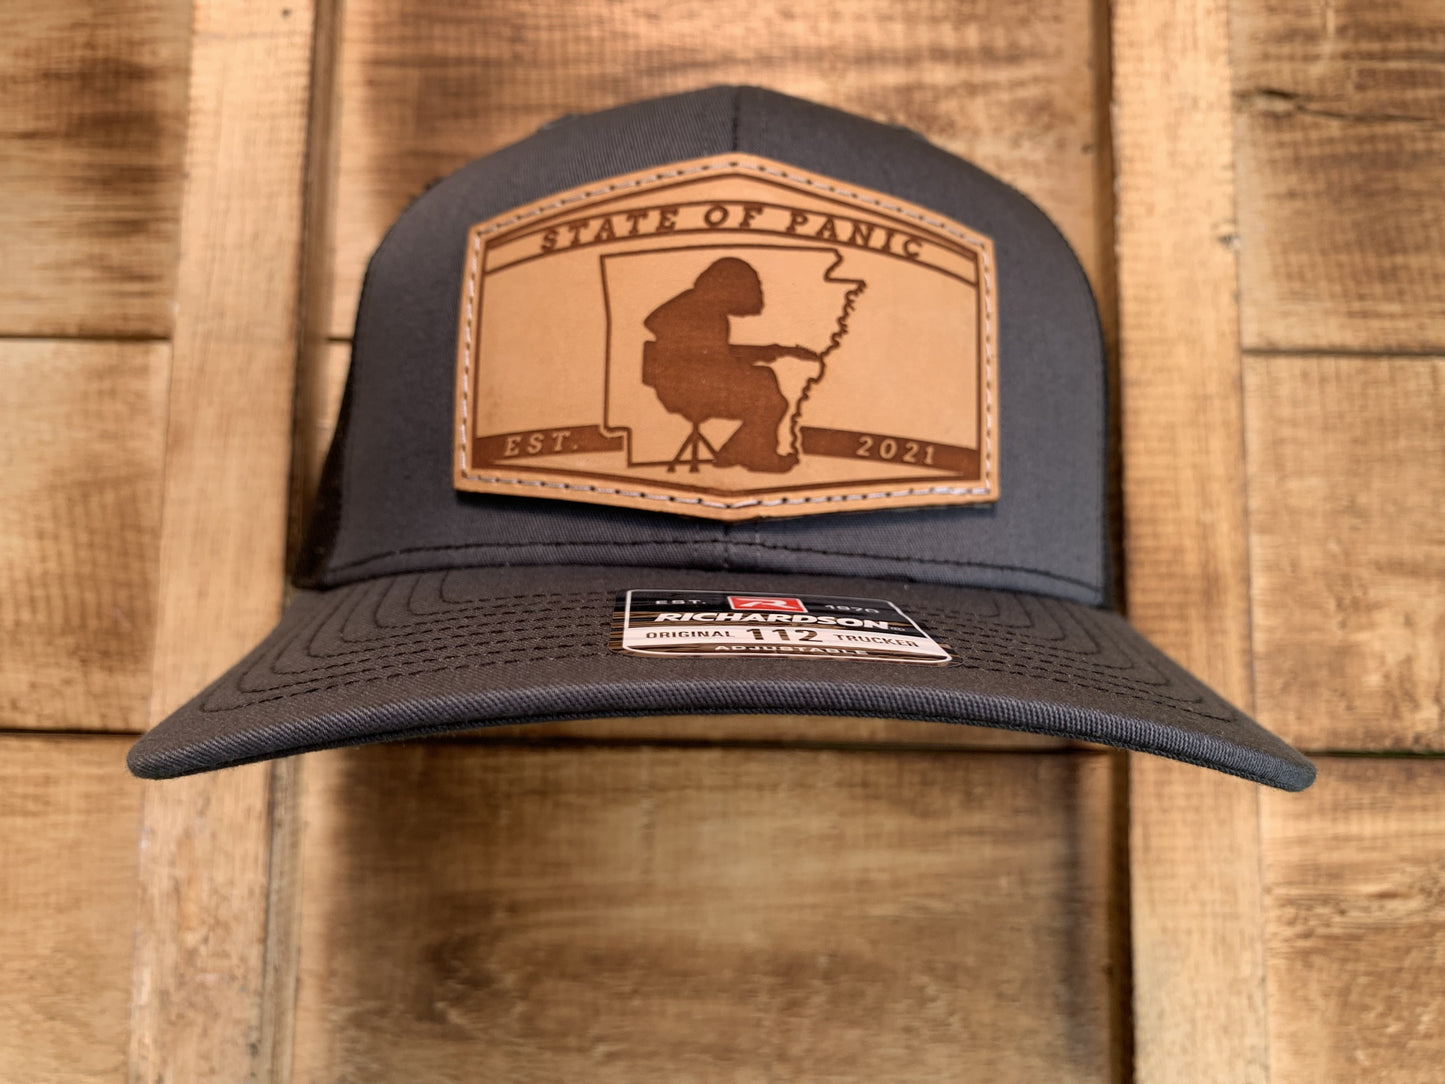 Widespread Panic - Arkansas “State of Panic” Classic Leather Patch Hat